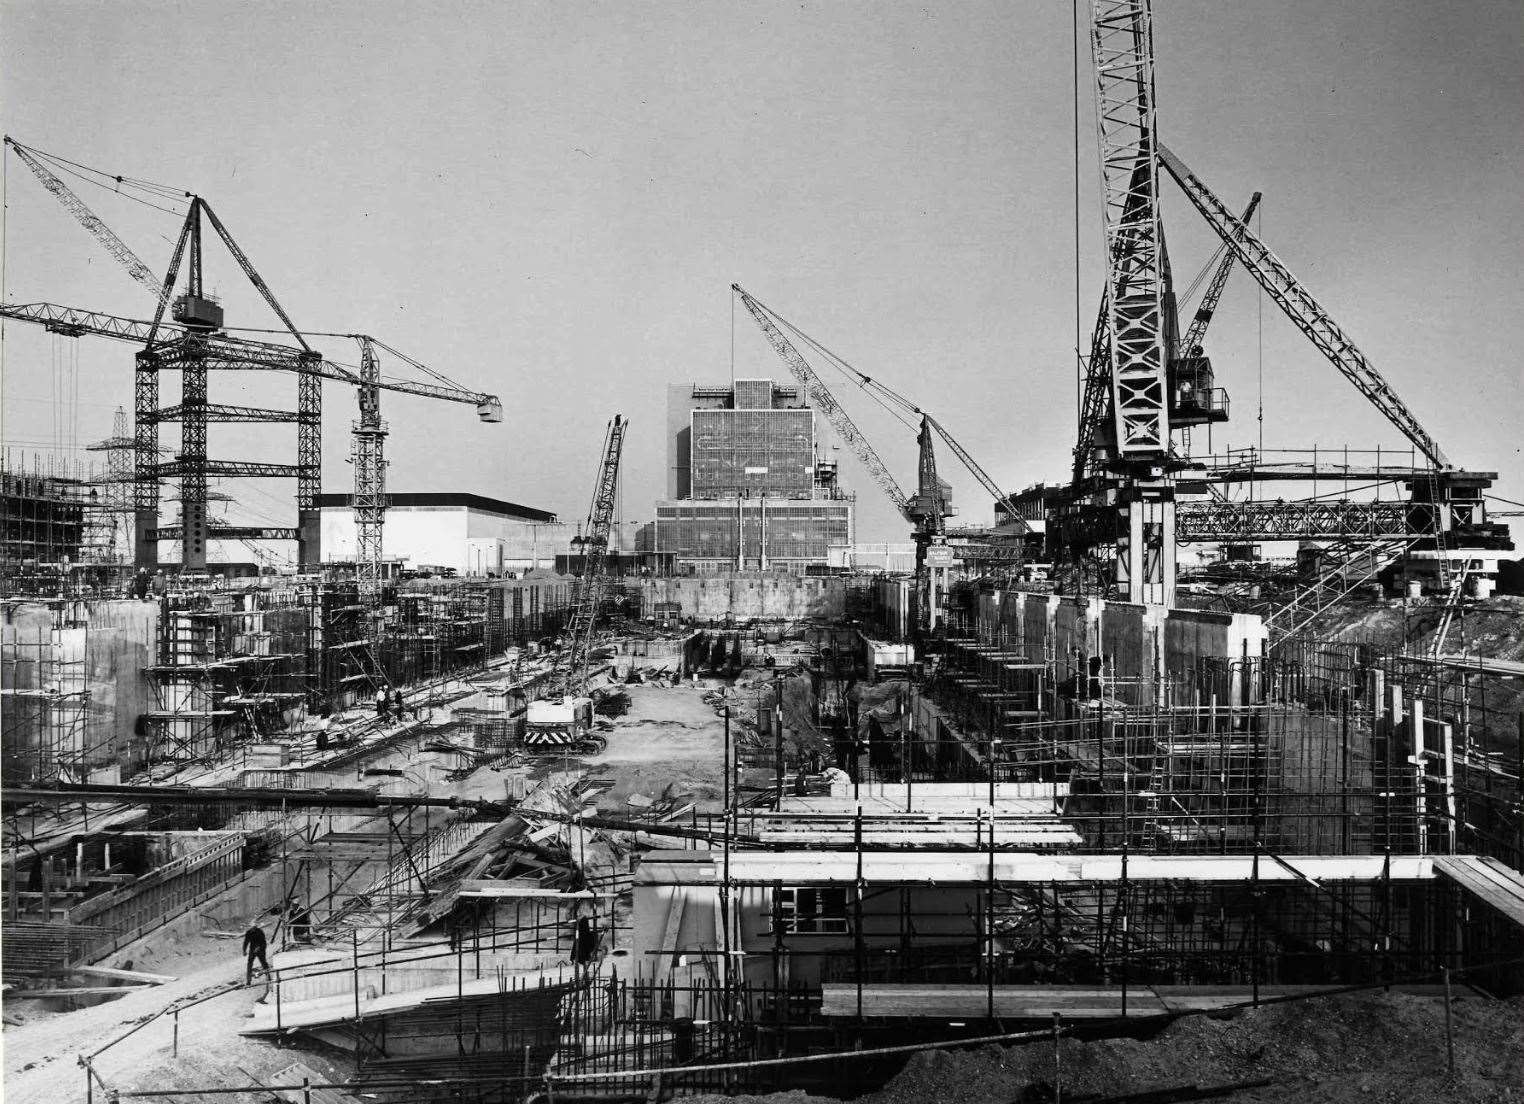 Dungeness B power station during construction in 1966. It began operation in 1983. Its reactors have been non-operational since 2018 with decommissioning beginning in 2021